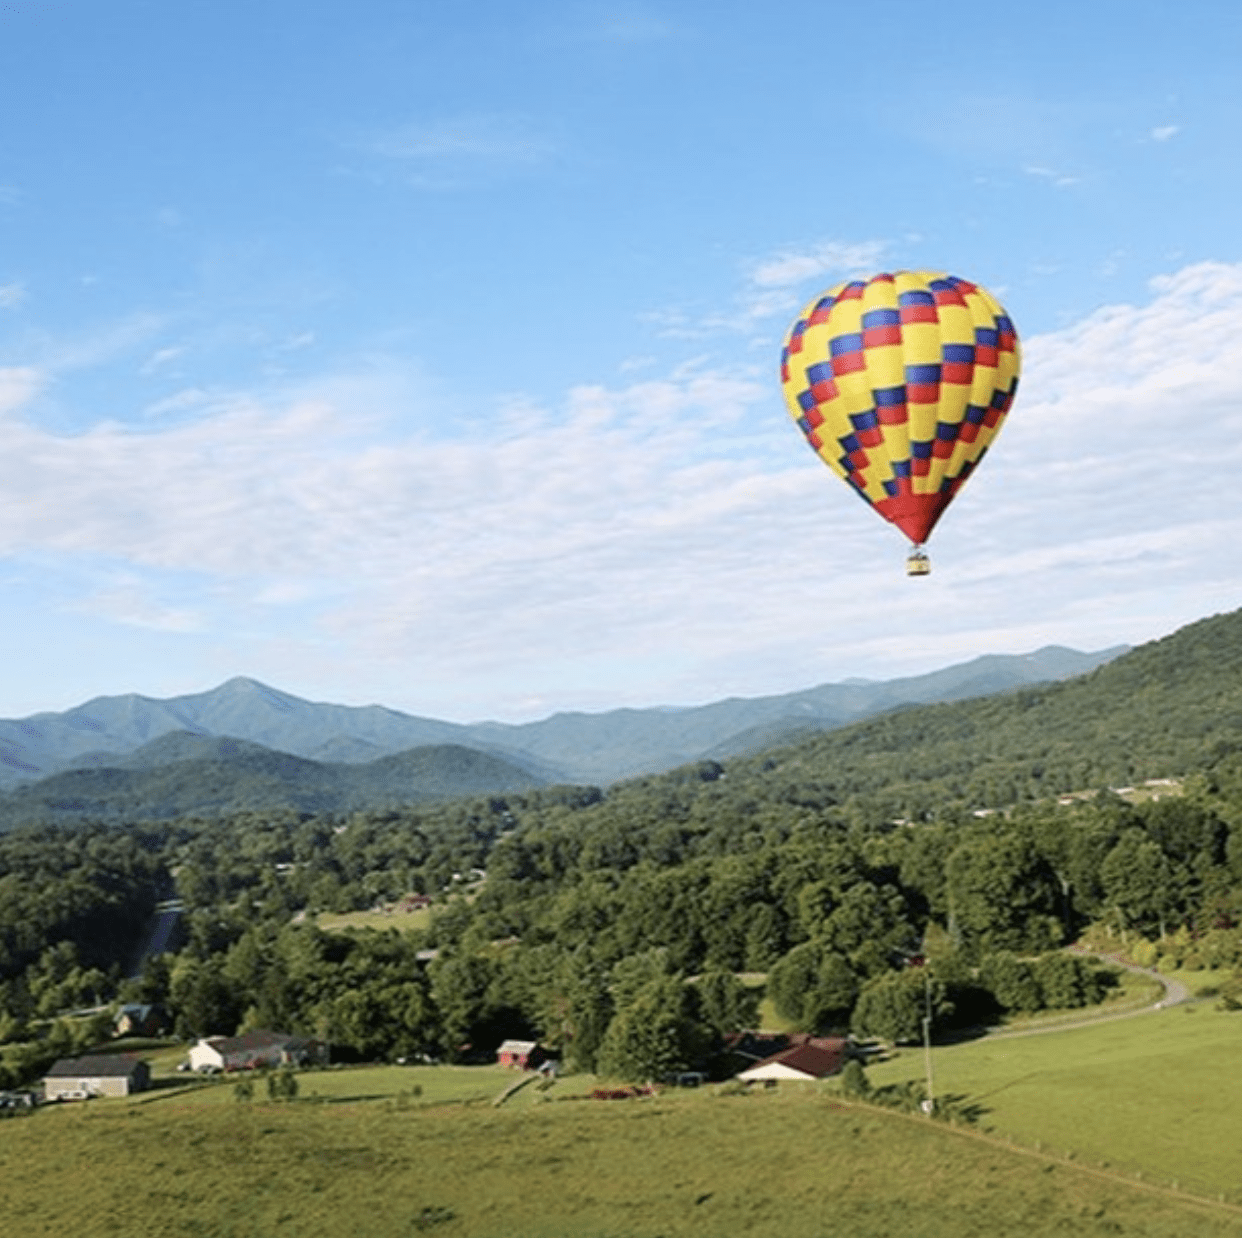 Romantic things to do asheville nc